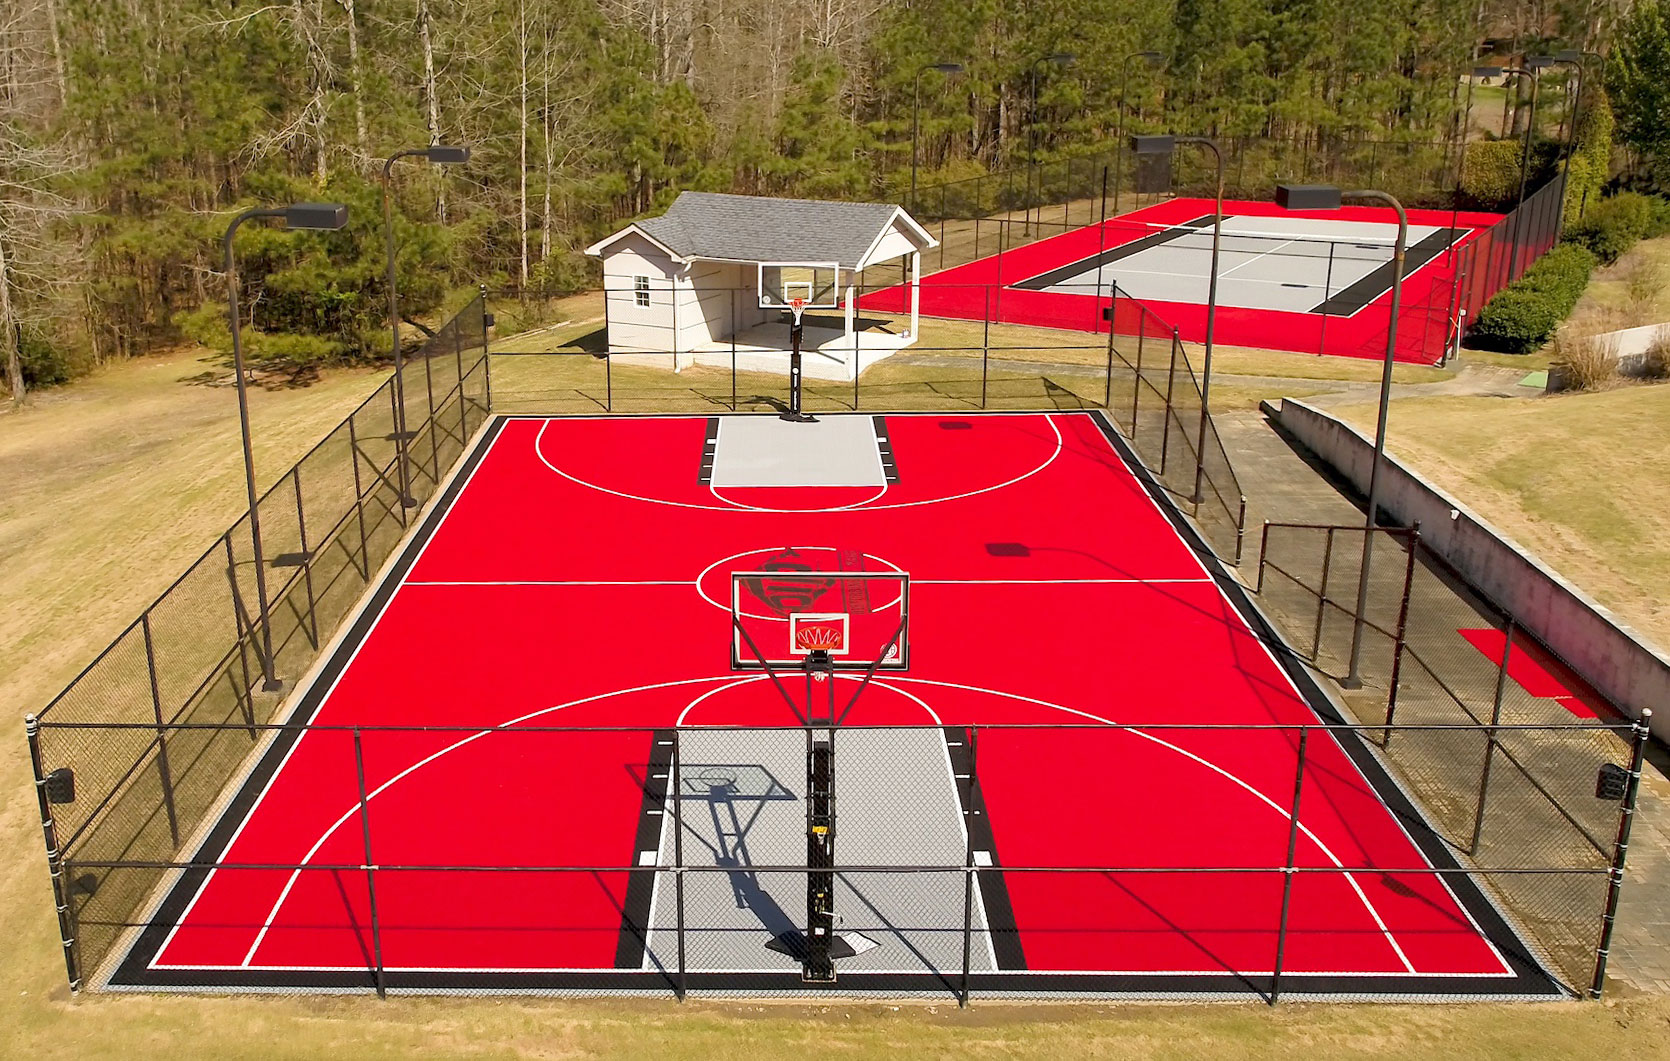 Red, gray and black basketball and tennis courts